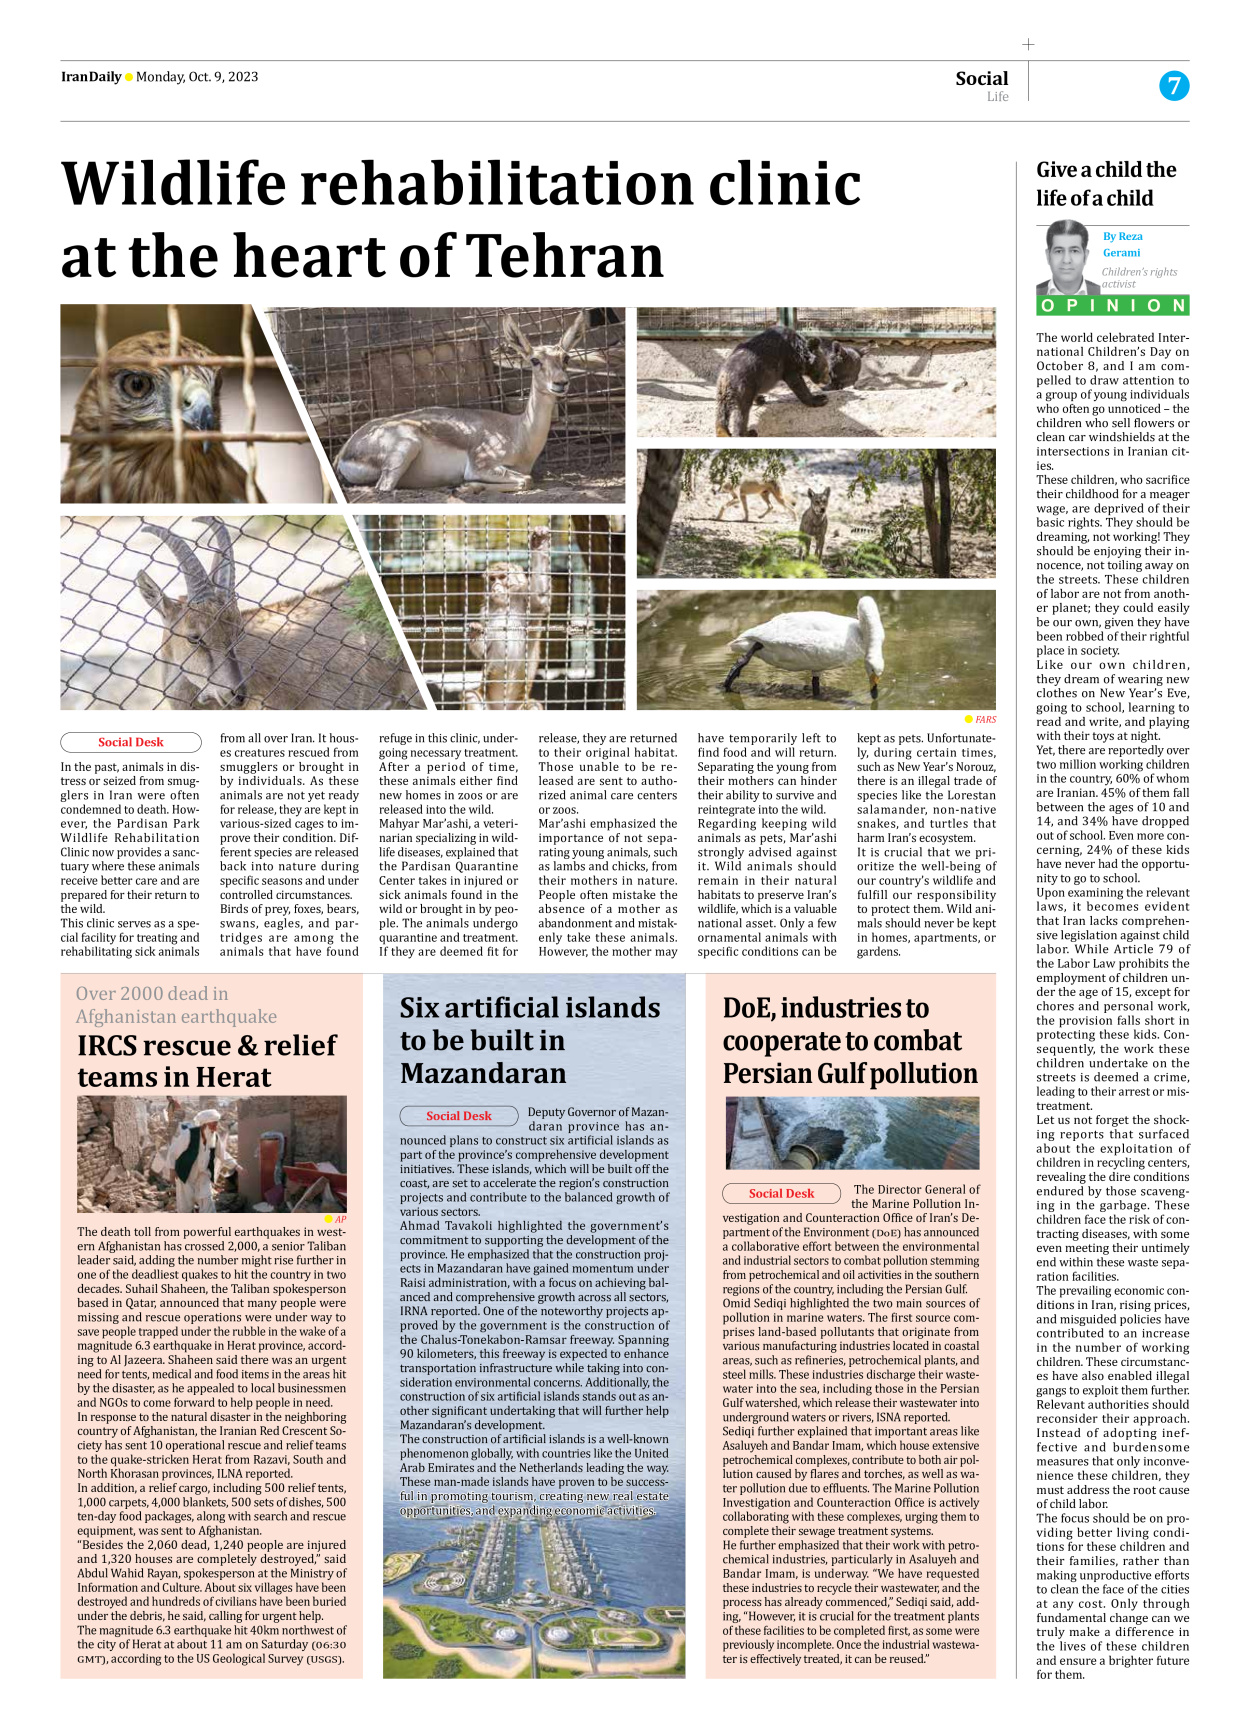 Iran Daily - Number Seven Thousand Four Hundred and Three - 09 October 2023 - Page 7